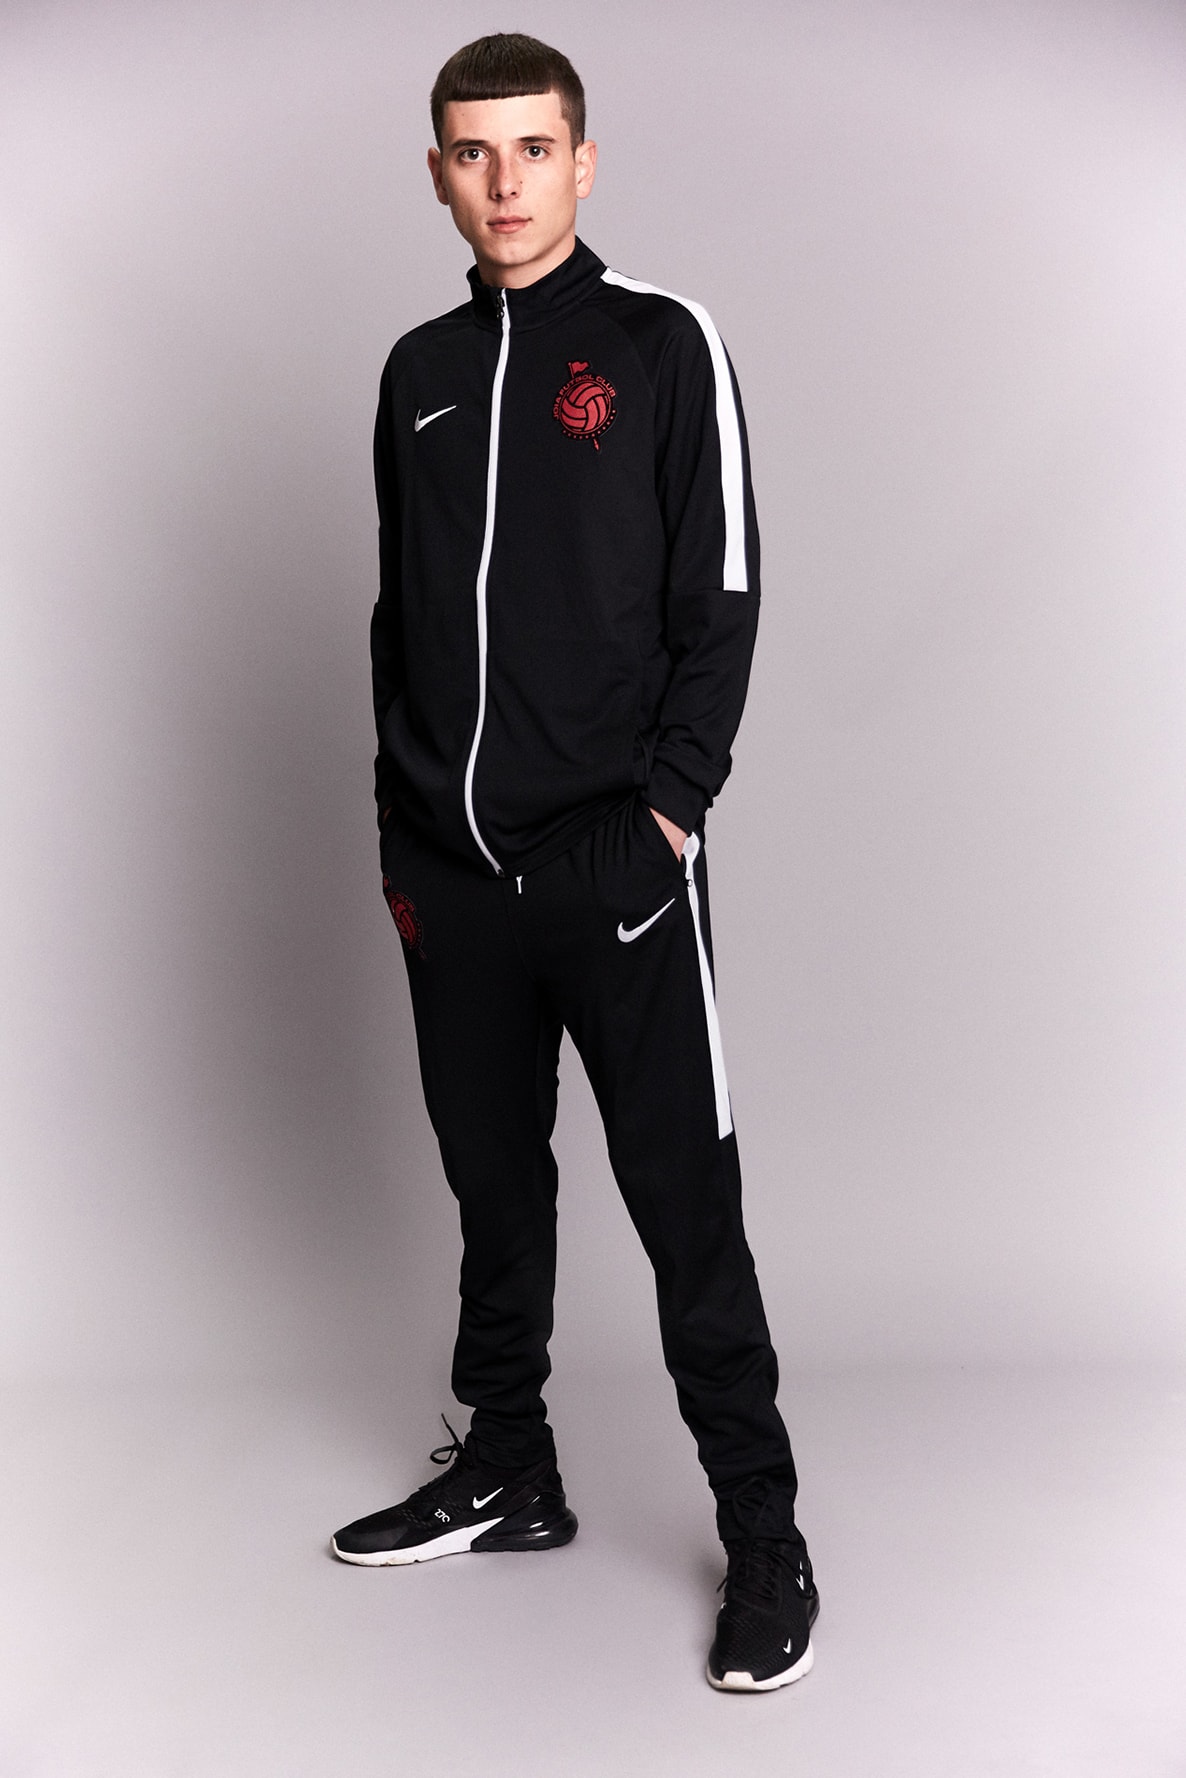 JOIA F.C. Nike Football Lookbook Collection Fashion MAGAZINE 2018 Fifa World Cup Chile Santiago Release Info Closer Look Details Soccer Jersey Tracksuit